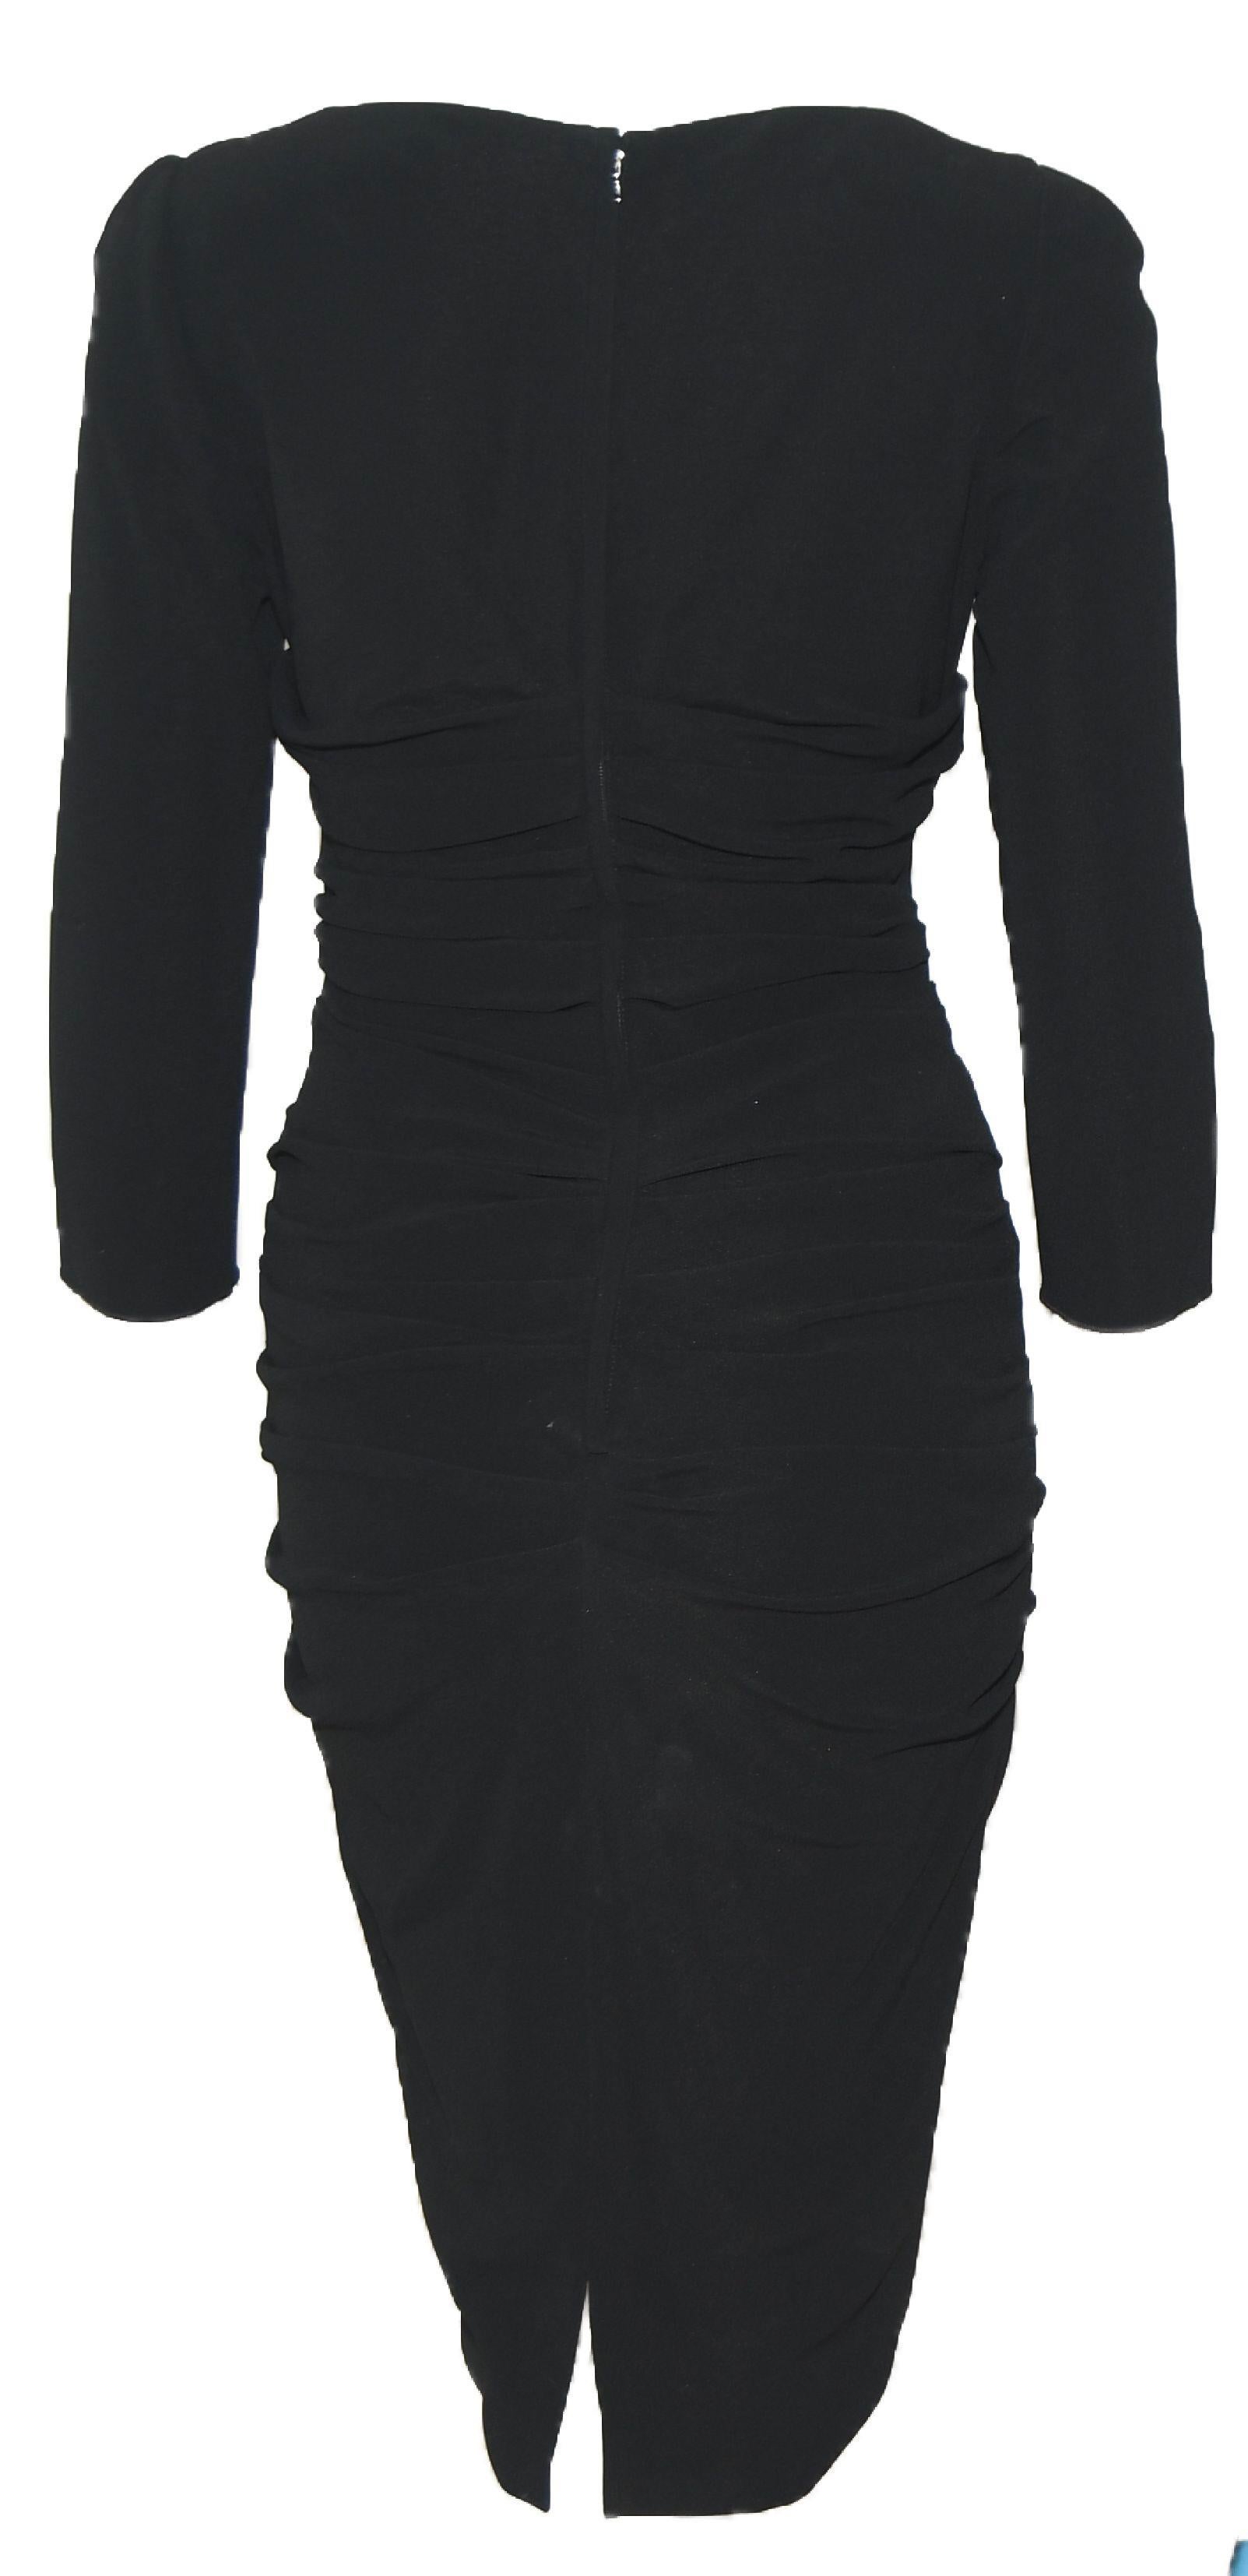 Dolce & Gabbana Black Gathered Long Sleeve Dress 40 EU In Excellent Condition For Sale In Palm Beach, FL